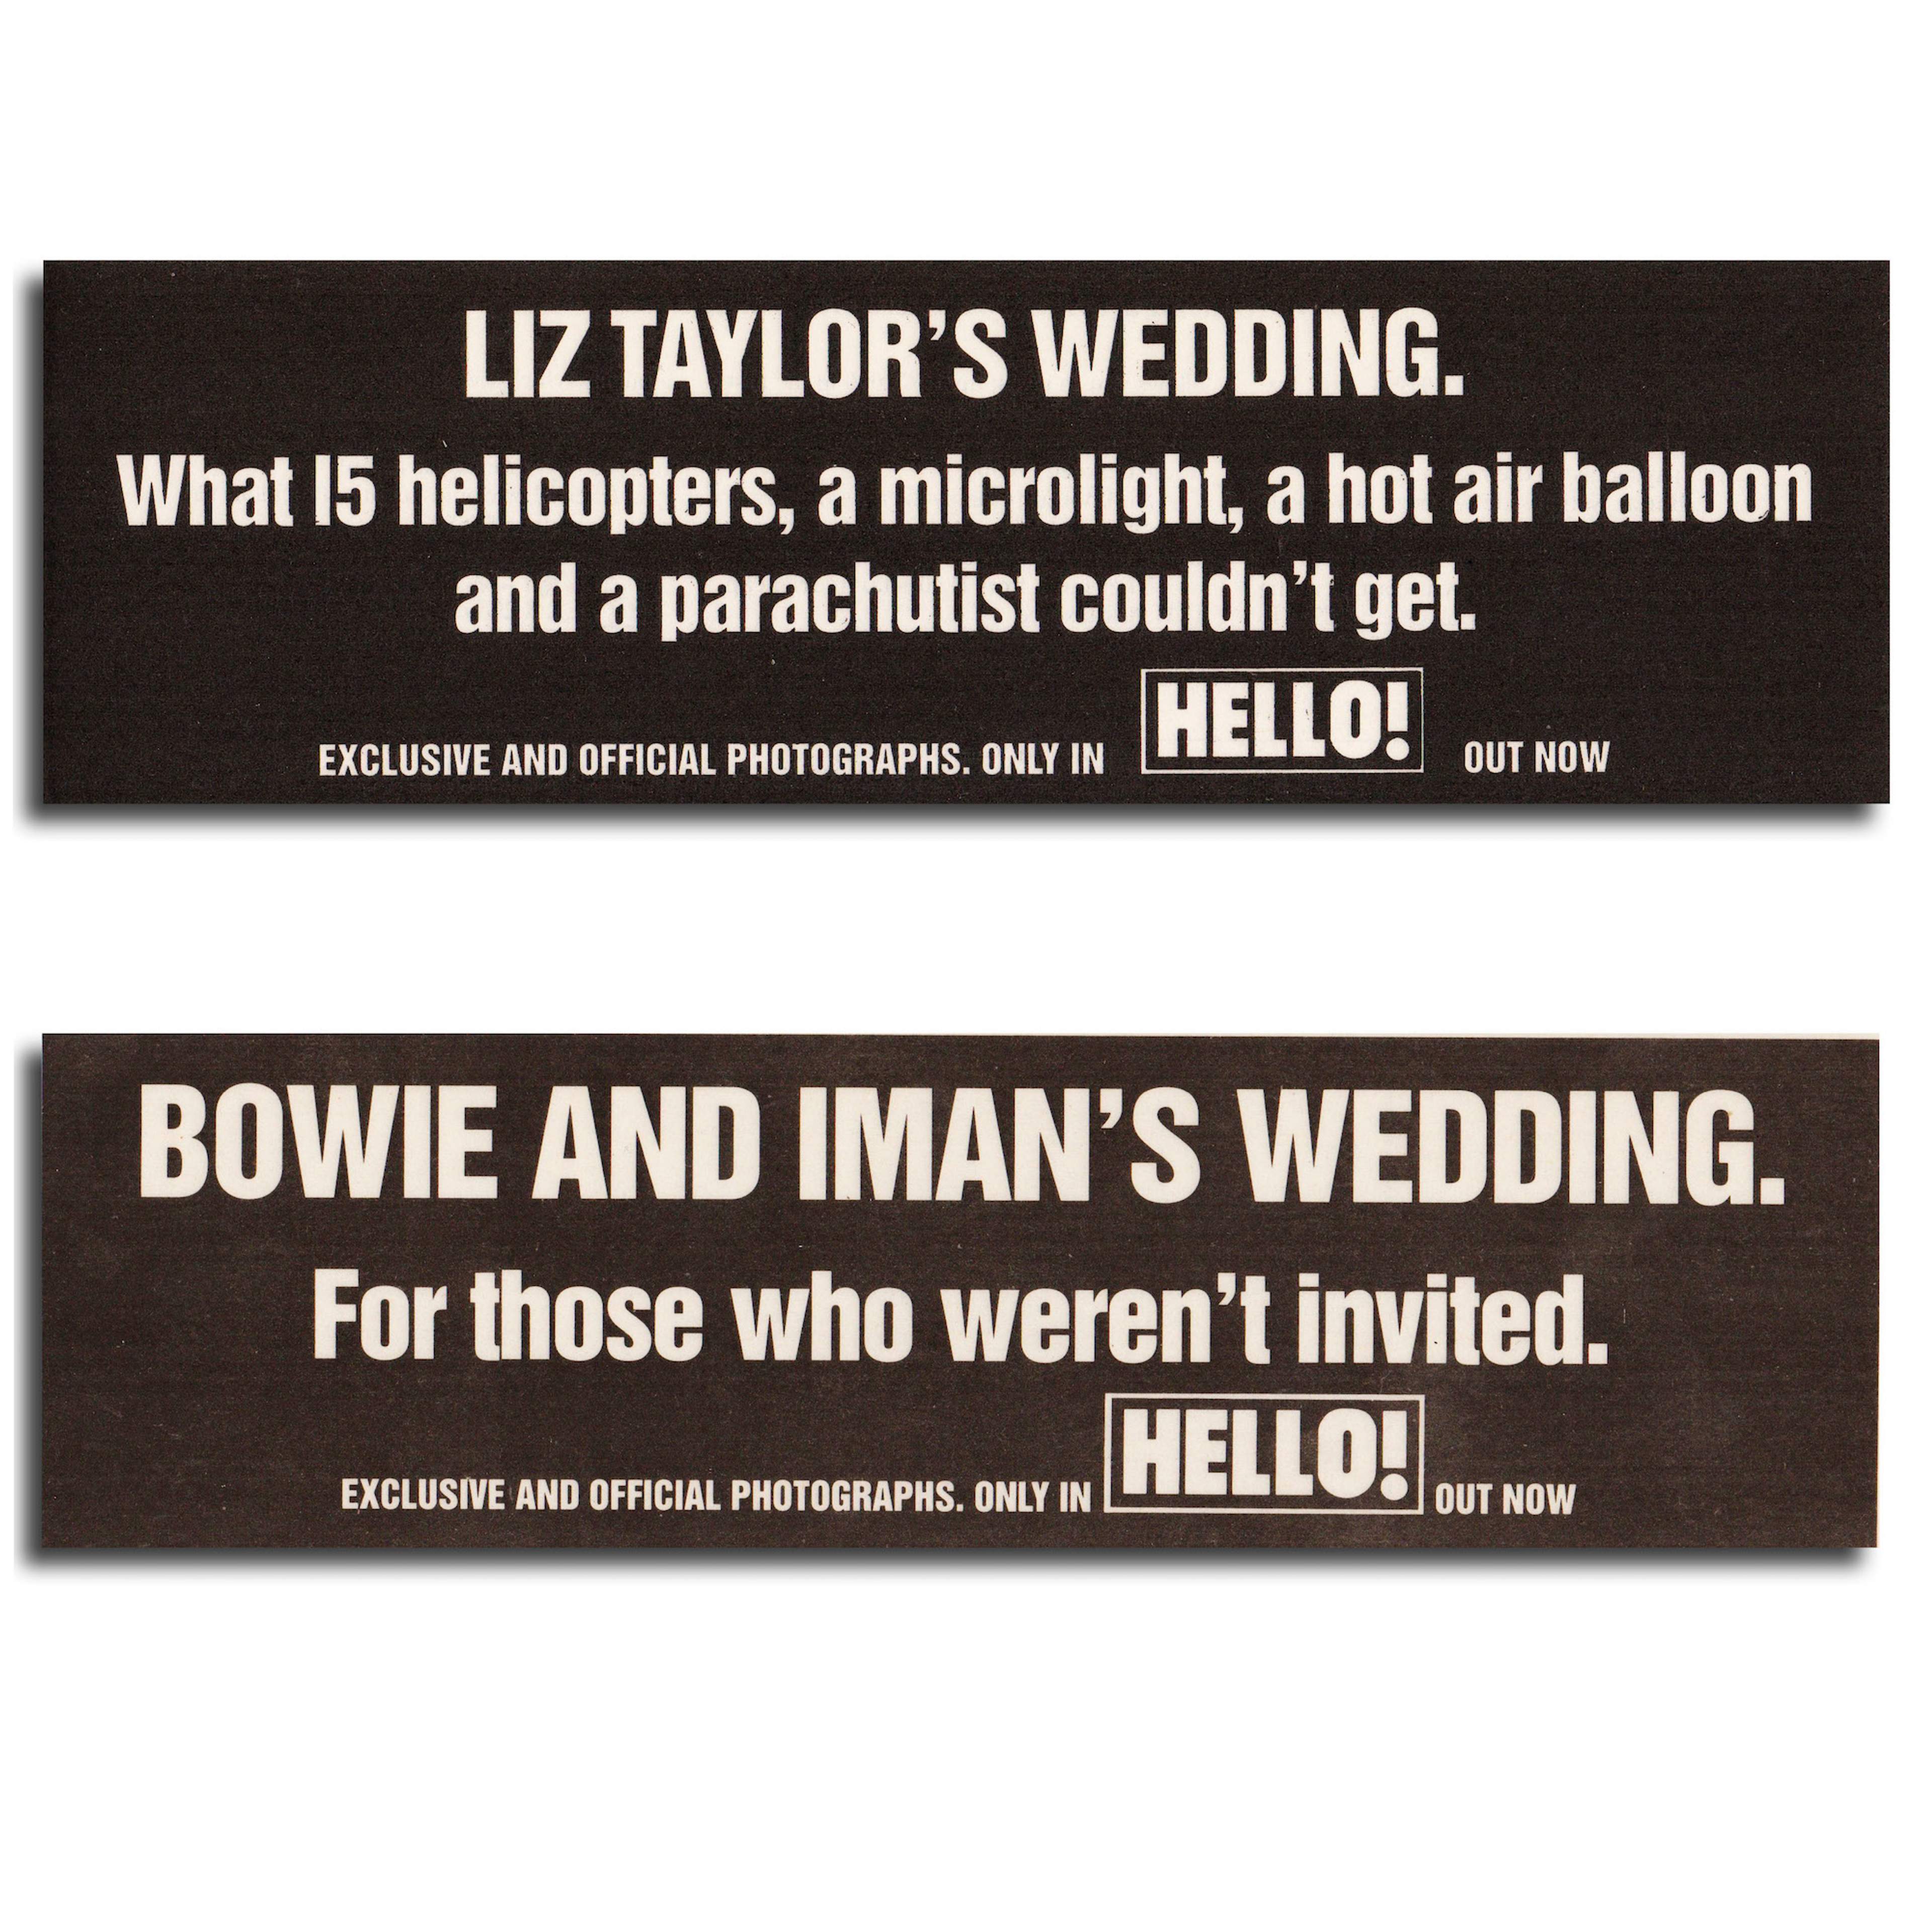 Hello Magazine press ads for Elizabeth Taylor's wedding, and David Bowie and Iman's wedding.